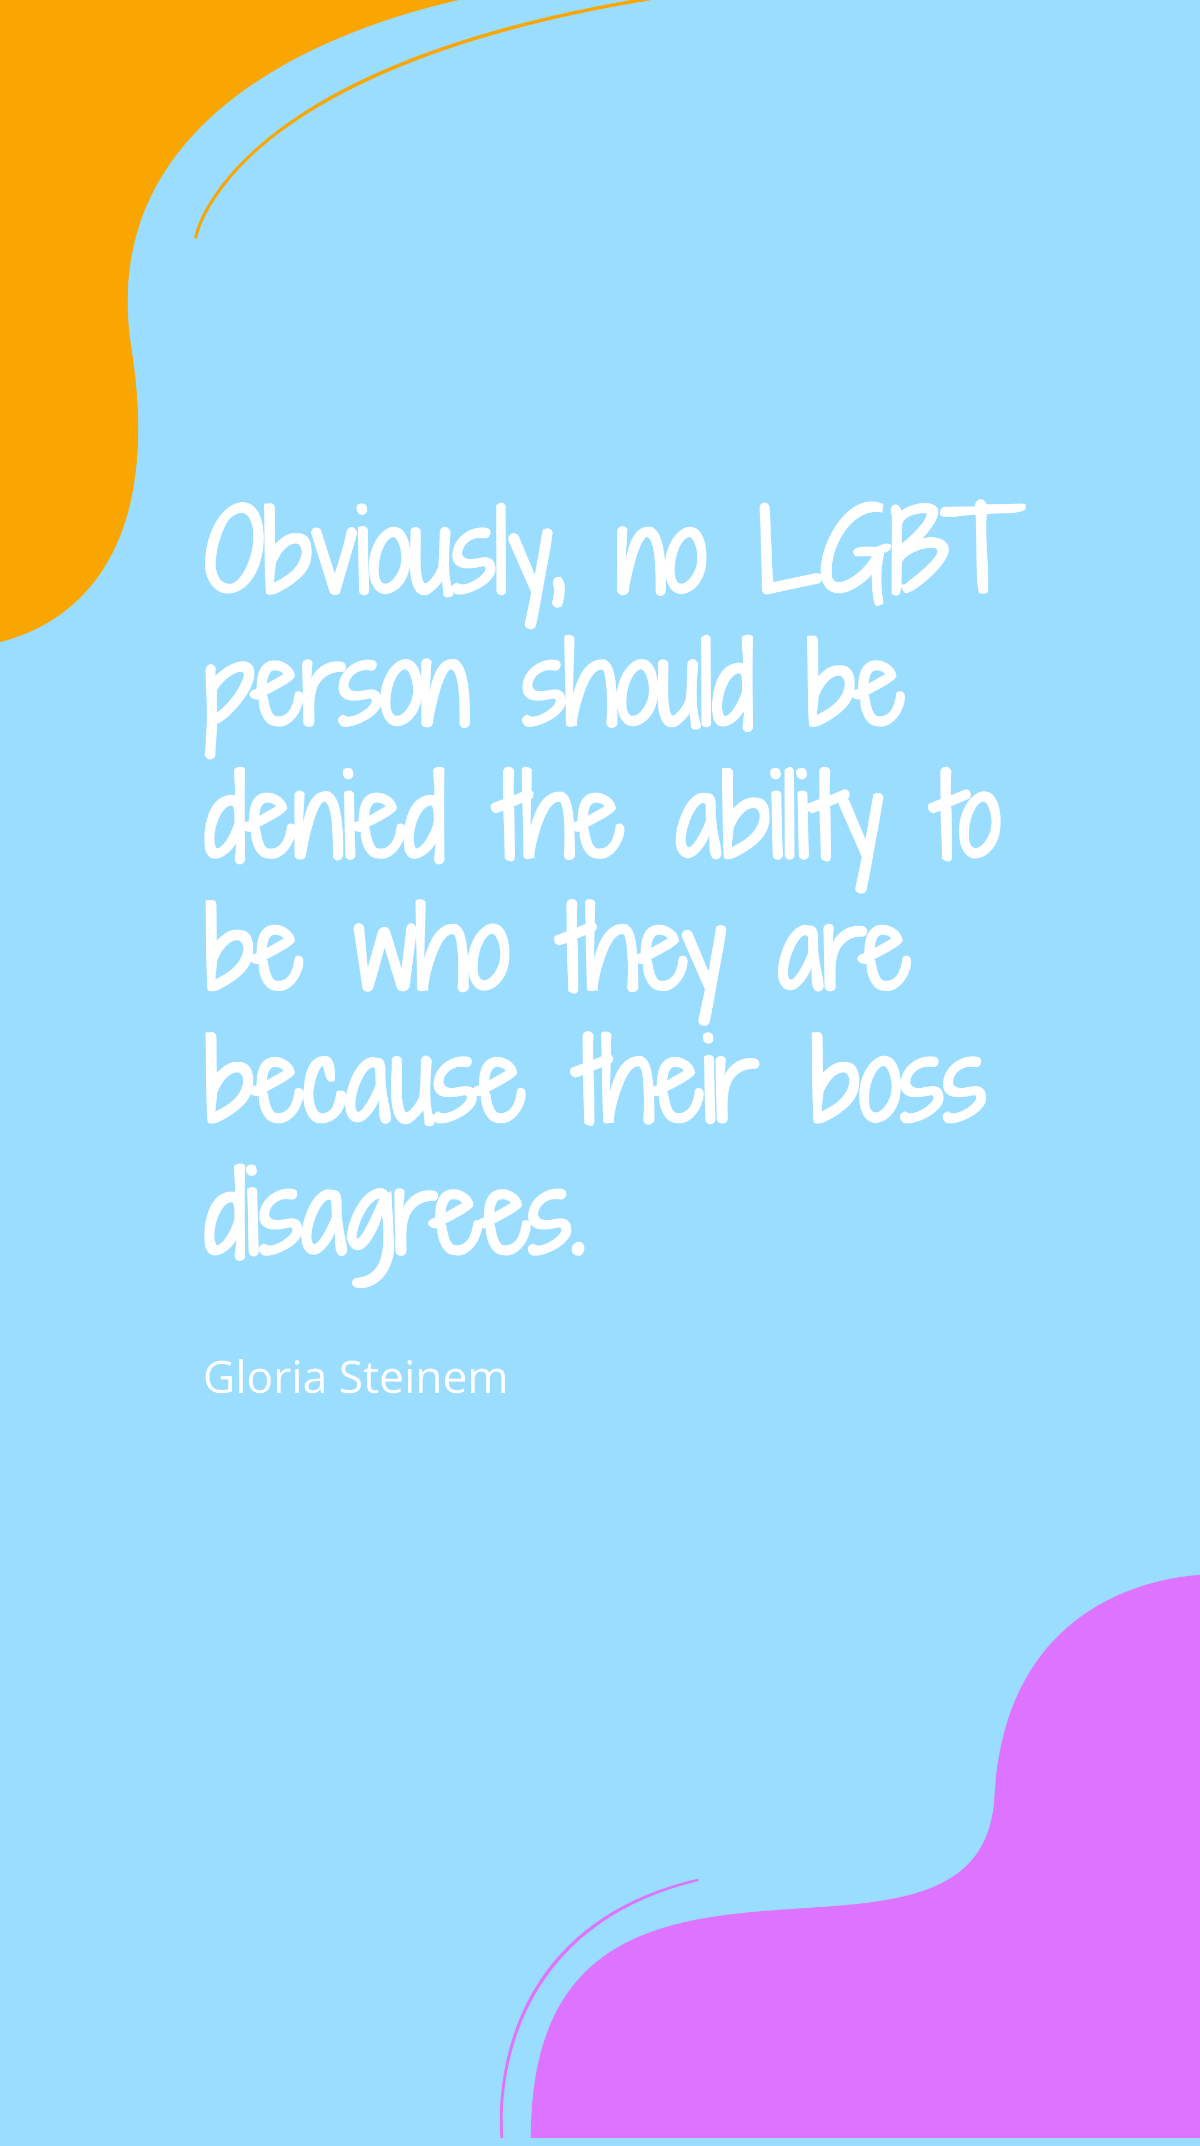 Gloria Steinem - Obviously, no LGBT person should be denied the ability to be who they are because their boss disagrees. Template